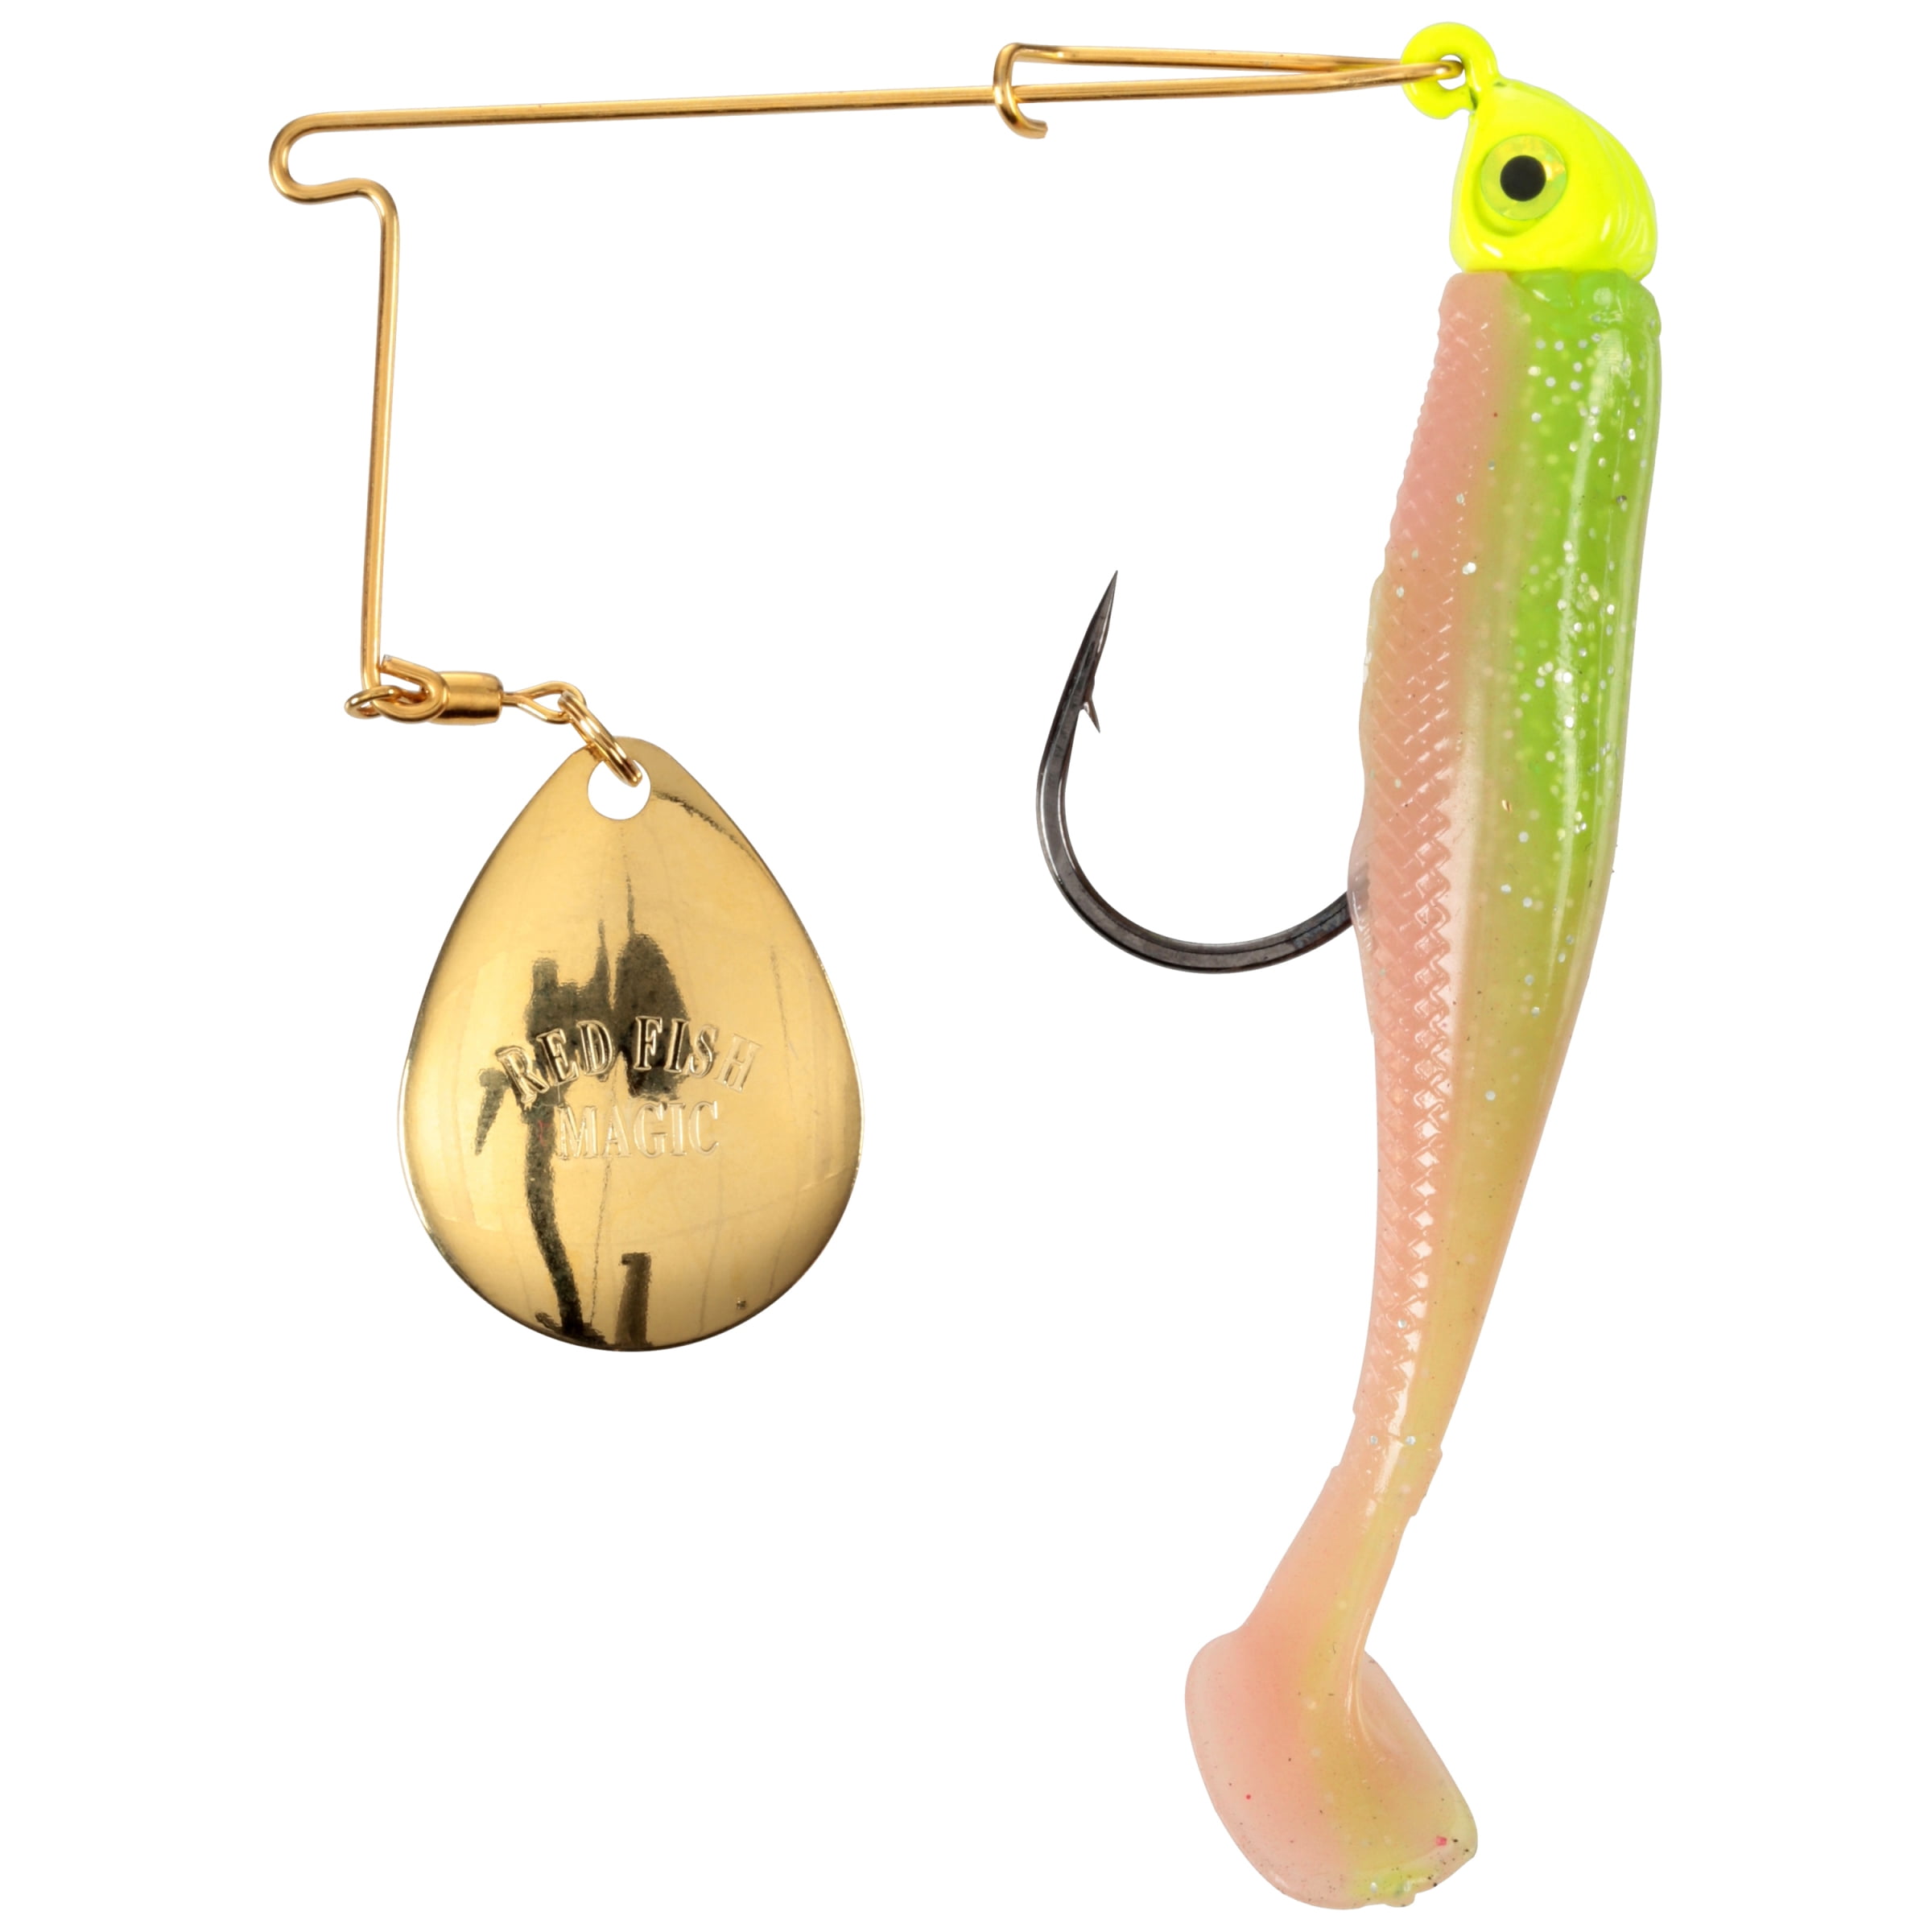 Strike King Heavy Cover Spinnerbait. Anyone use these before? : r